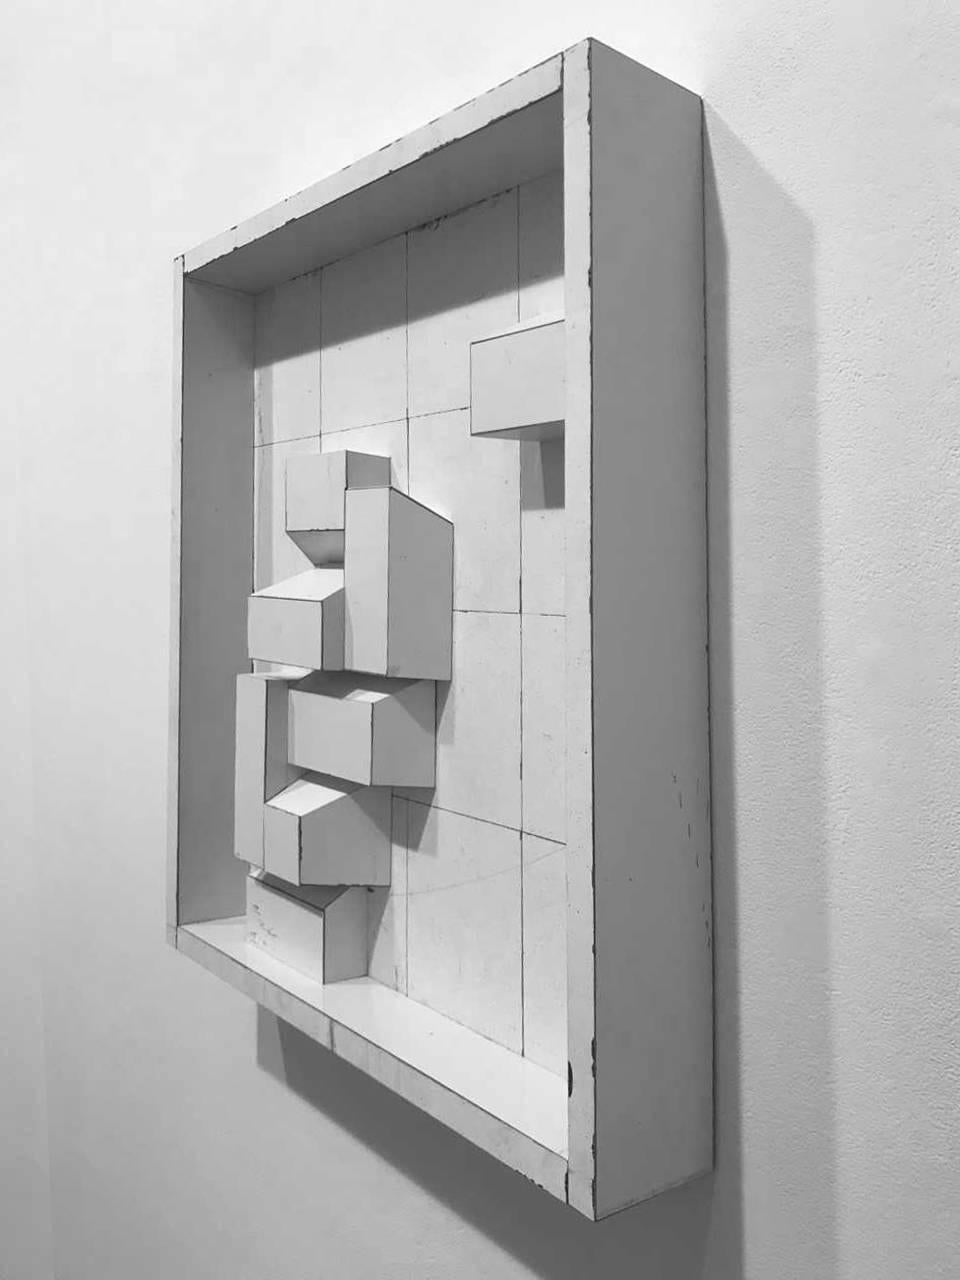 Educated Guess  - Abstract Geometric Sculpture by Ted Larsen